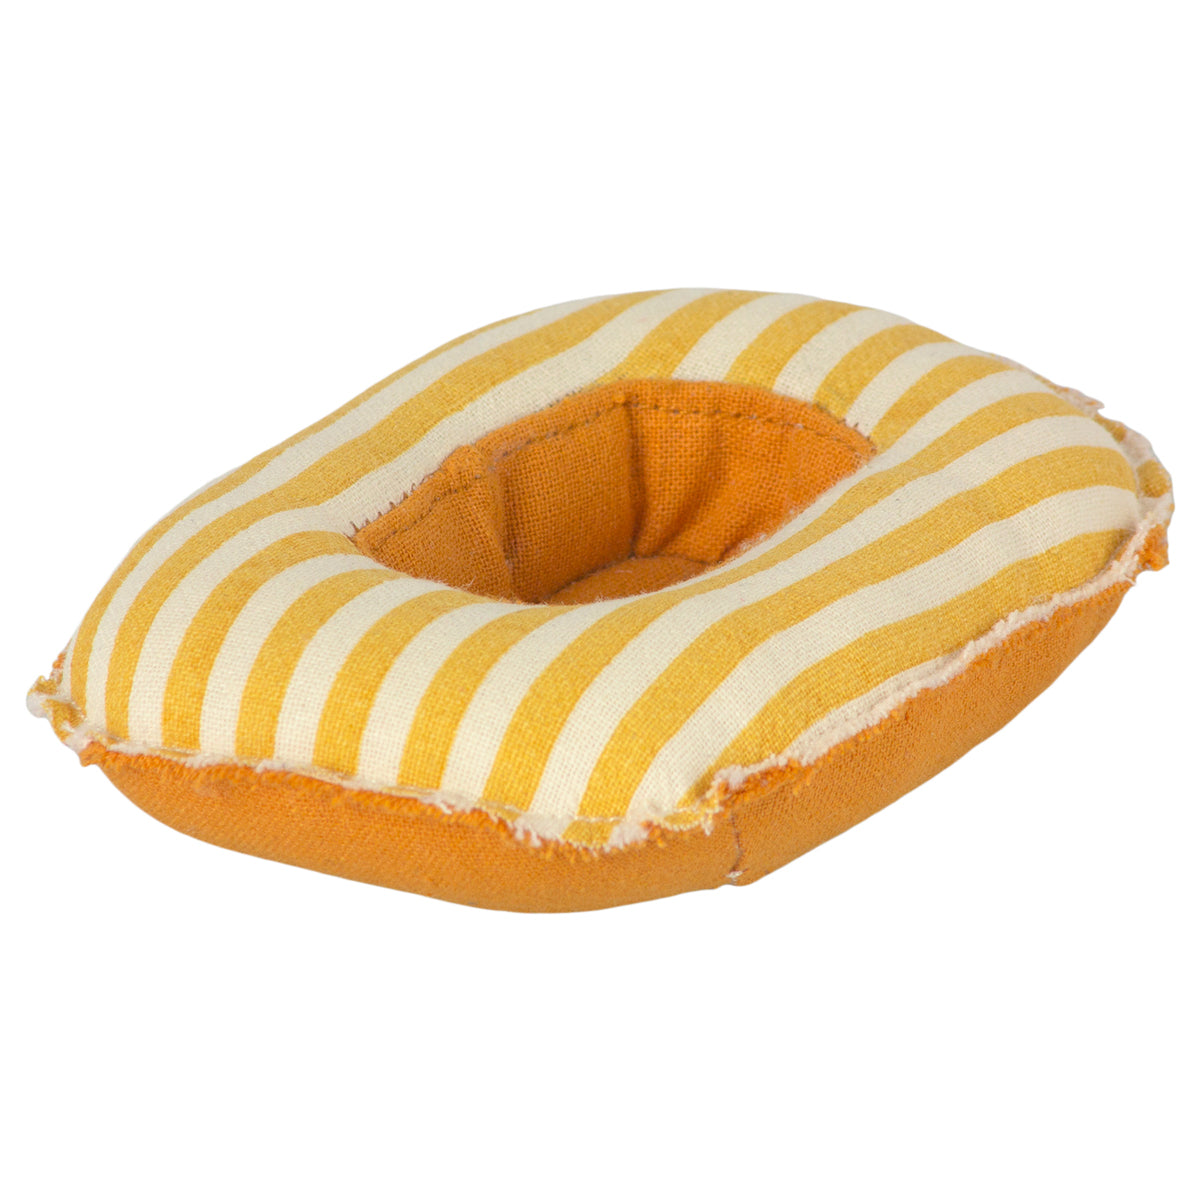 Maileg Rubber boat, Small mouse - Yellow stripe 11-1403-00